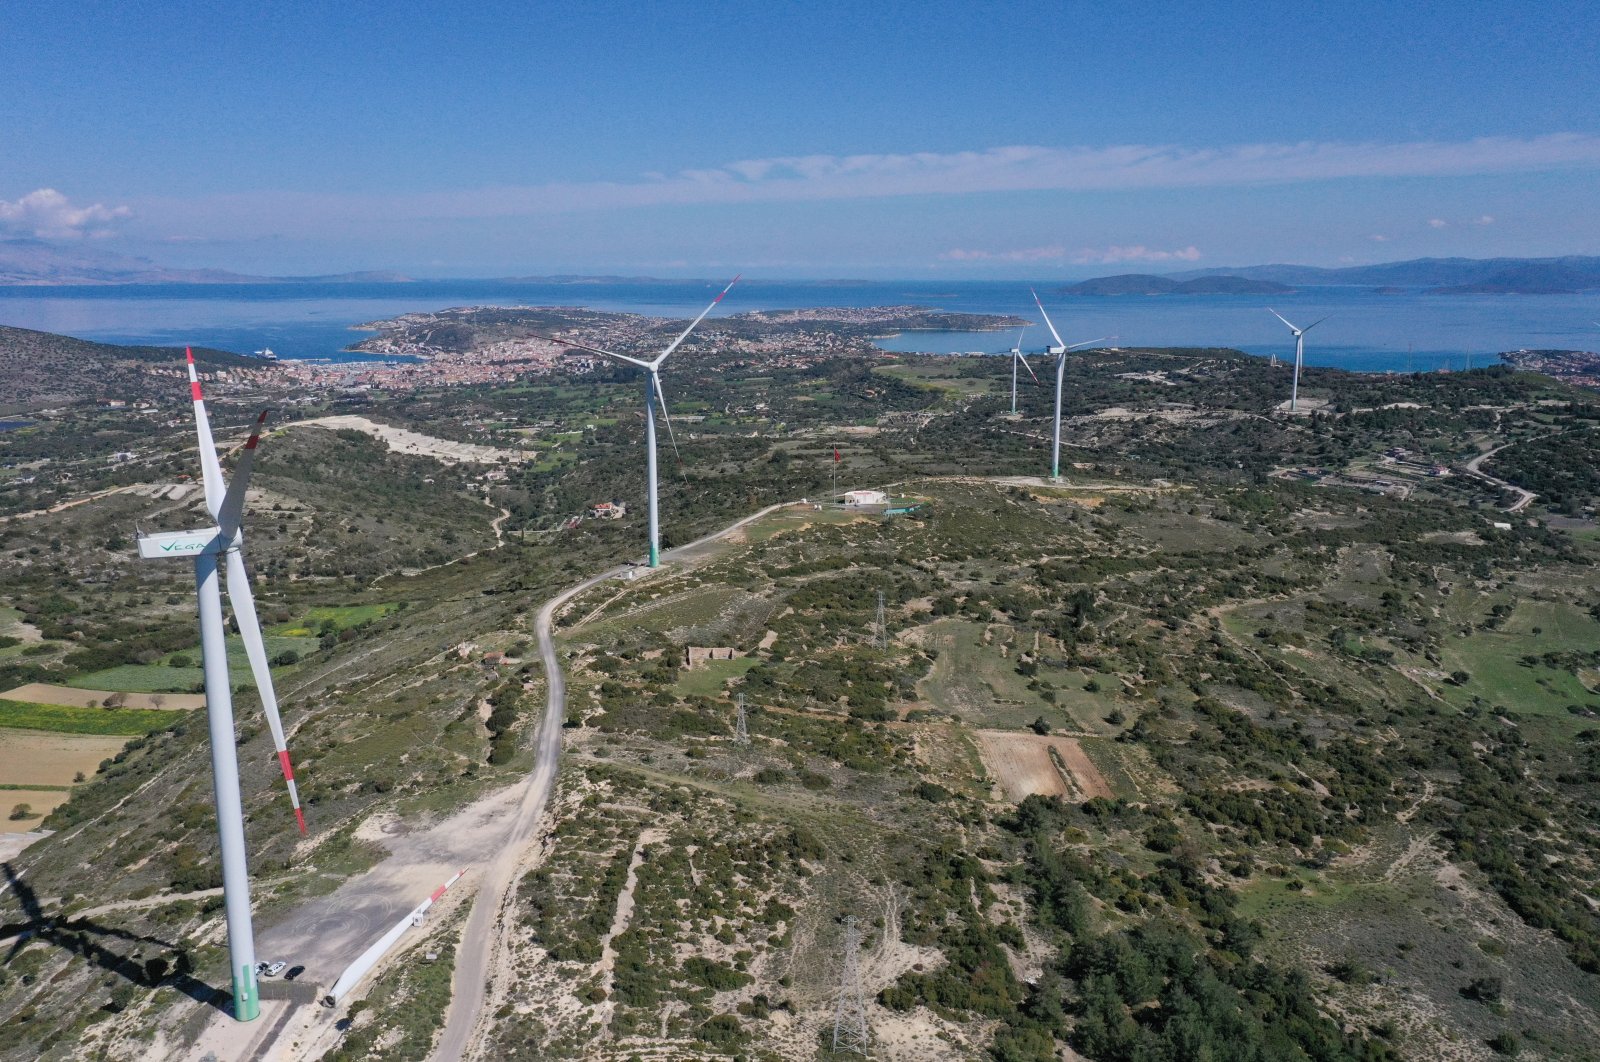 Wind turbines are seen in the Çeşme district of the Aegean province of Izmir, Turkey, April 20, 2022. (AA Photo)